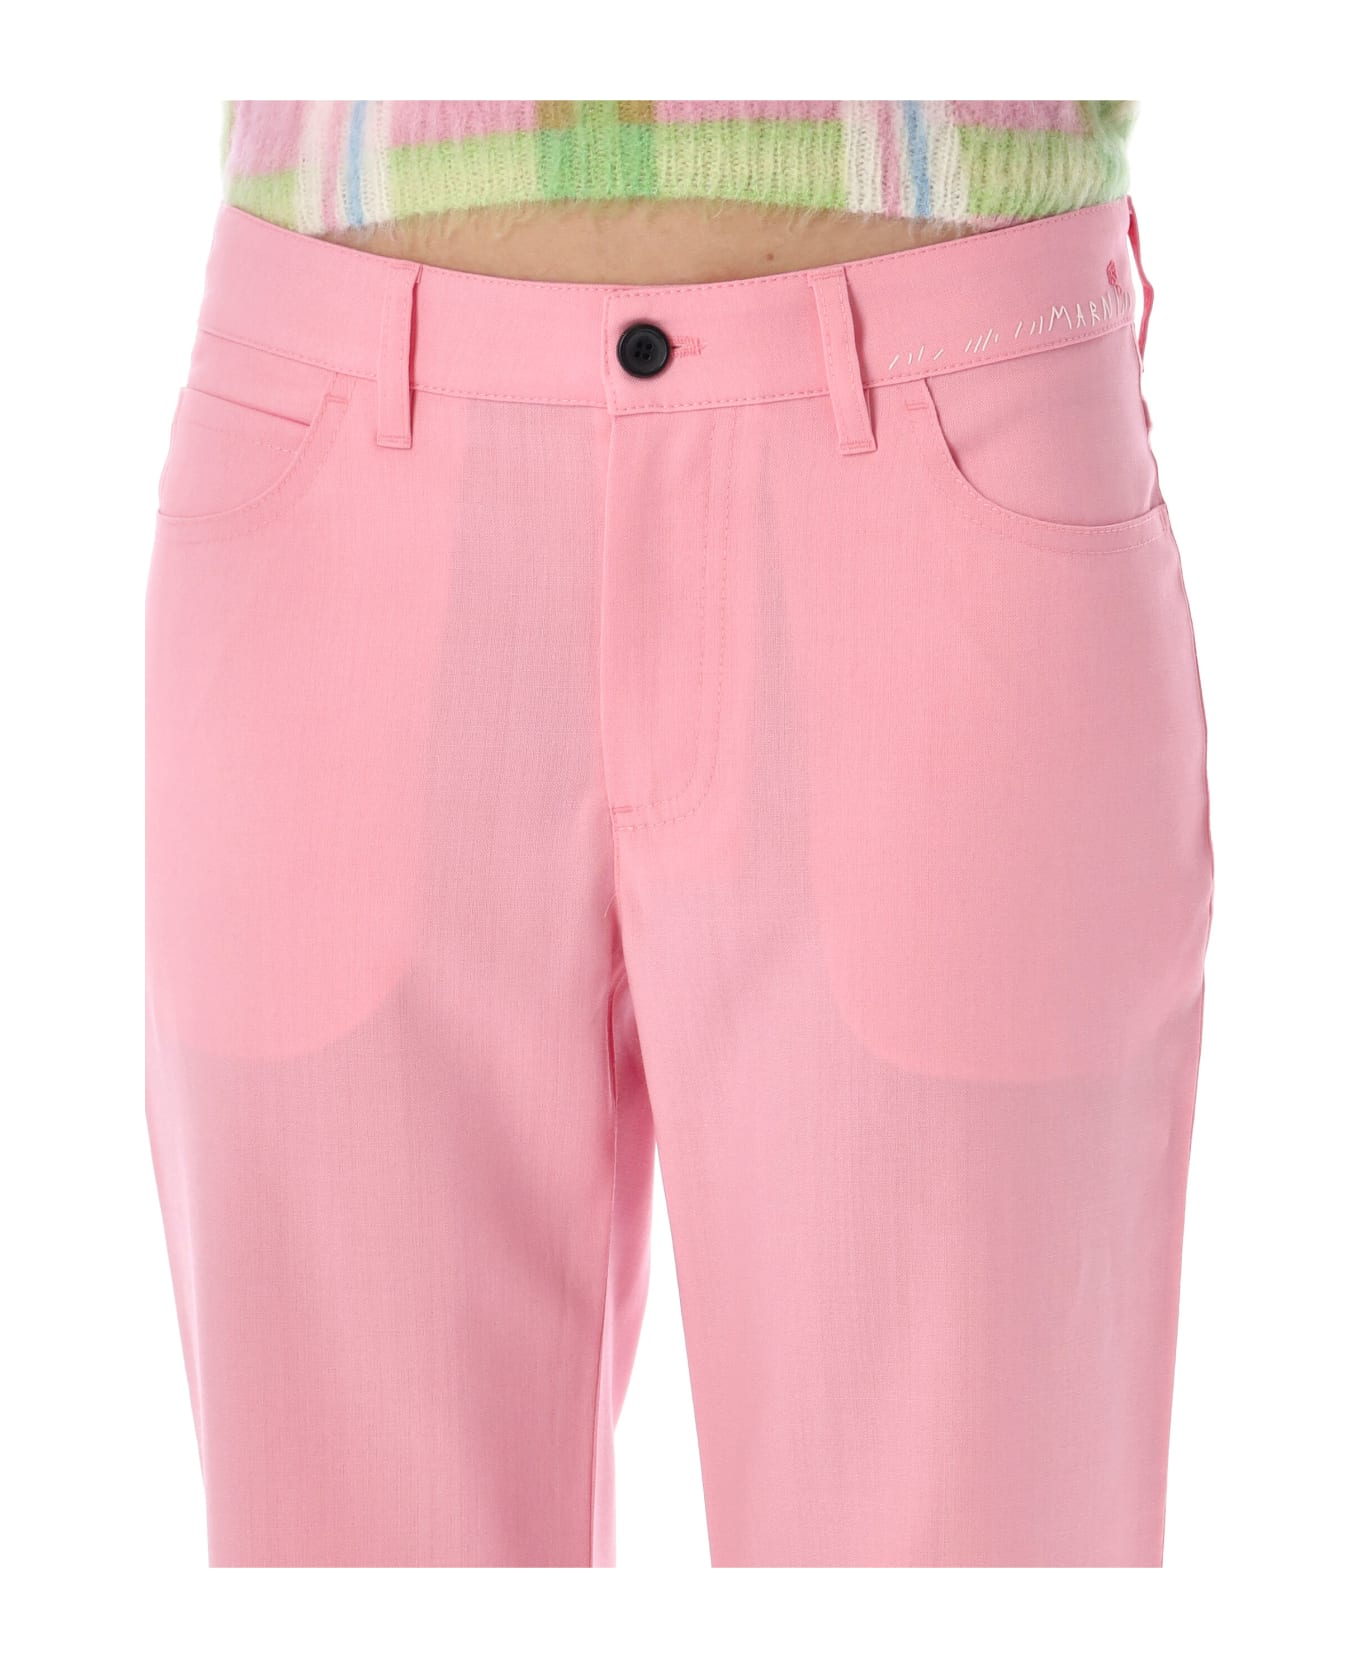 Marni Cool Wool Trousers - PINK GUMMY ボトムス